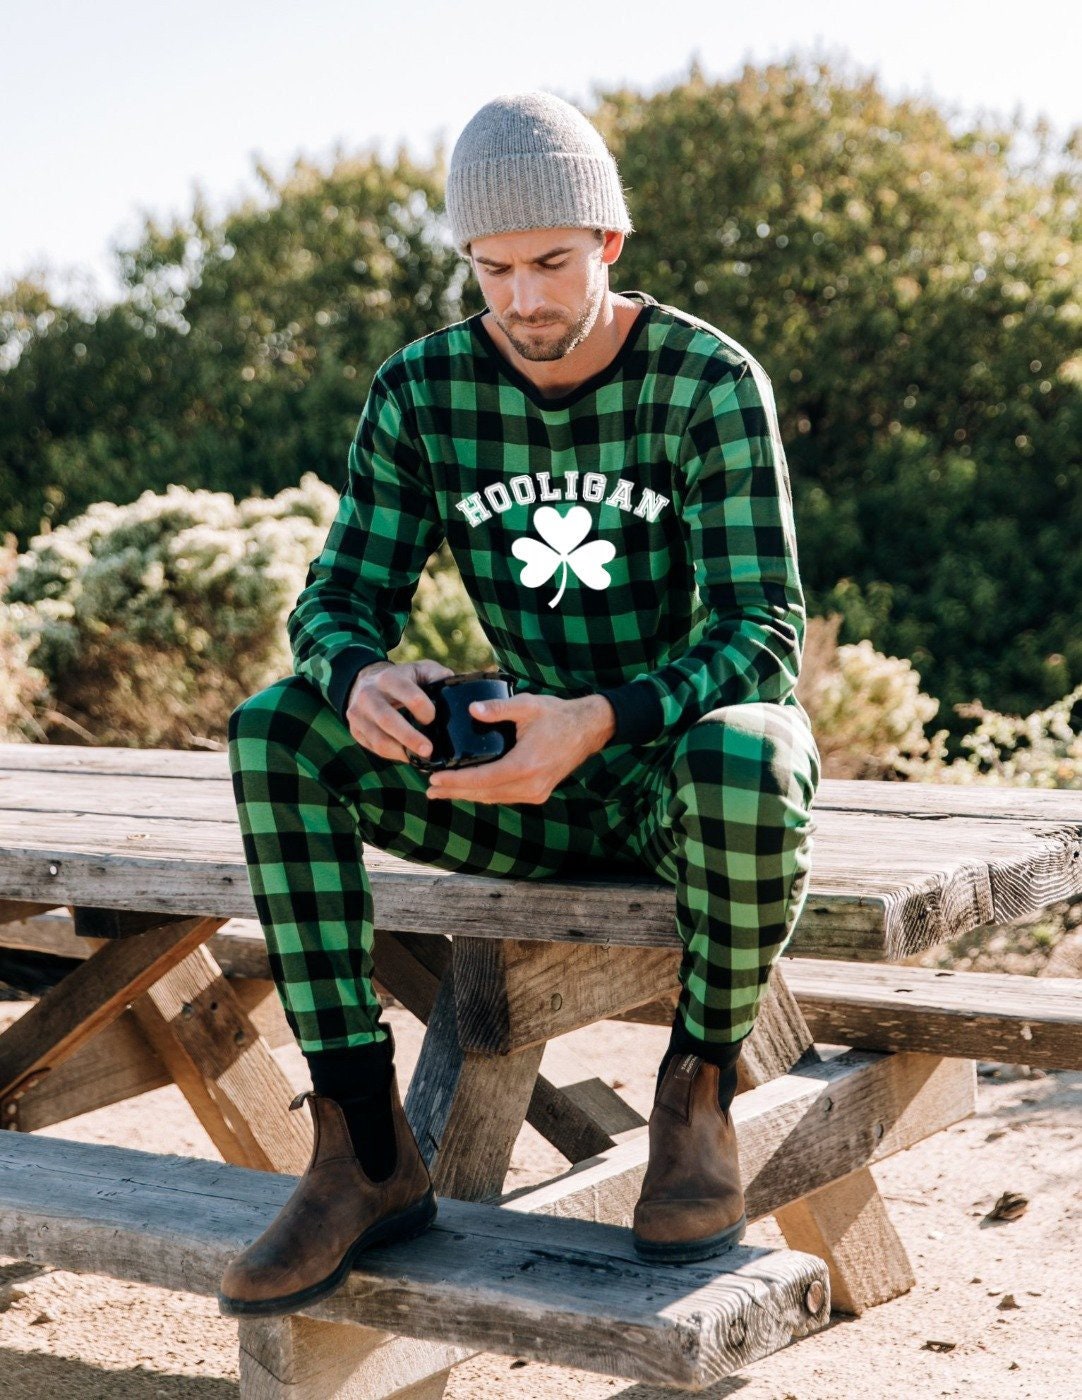 Hooligan Green Plaid Dog Pajamas for St Patrick's Day - Kids, Adults and Dog Sizes, toddler st patty's pjs - men's st patty's pjs